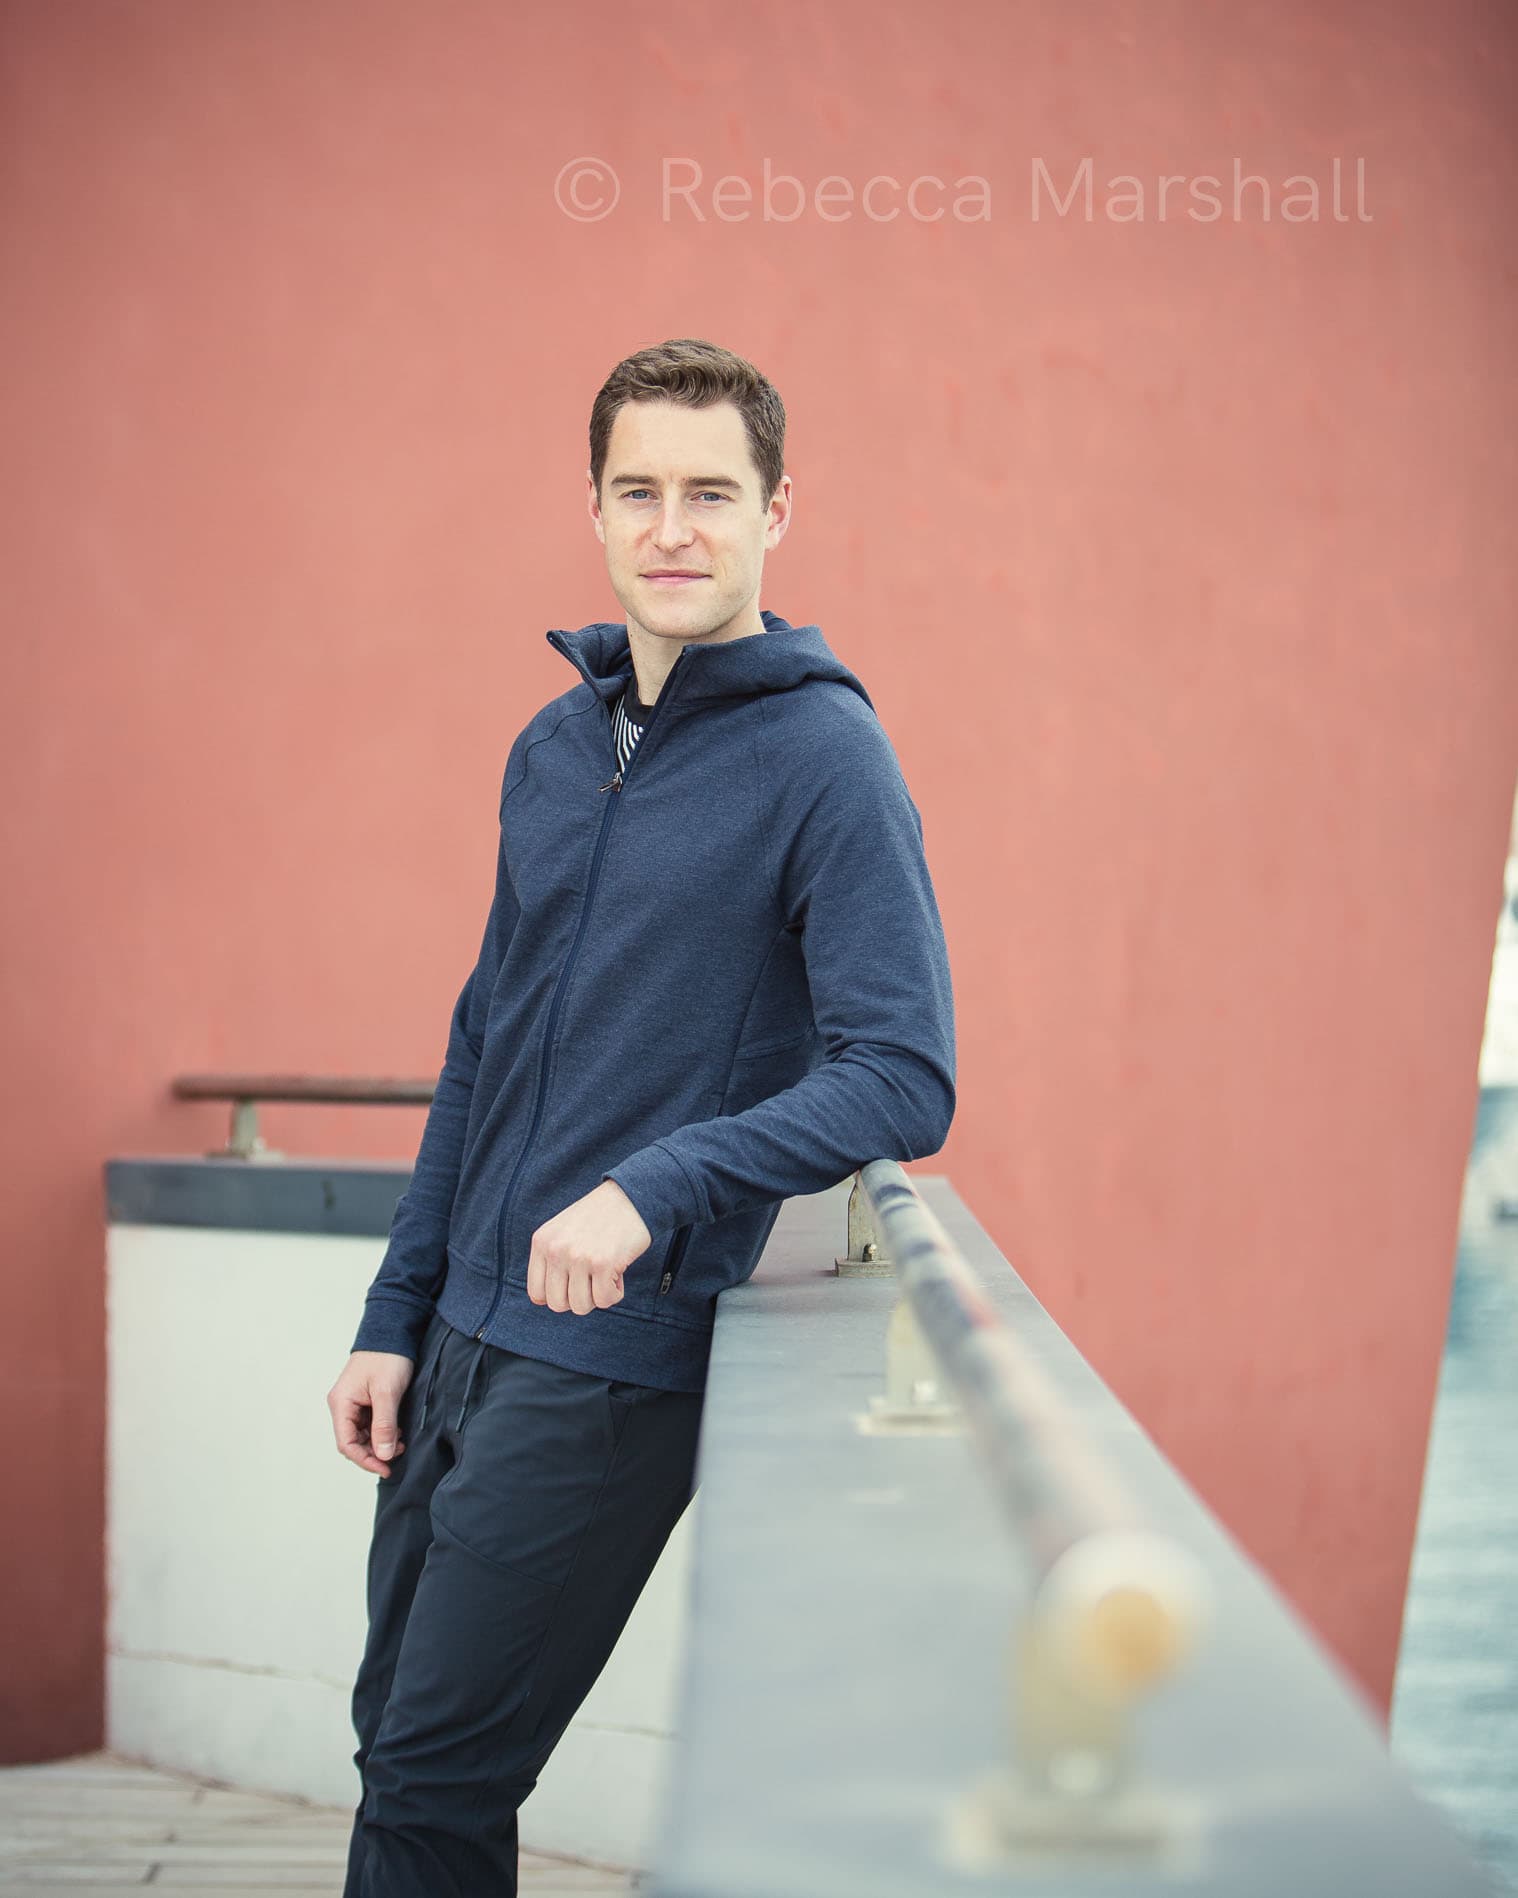 Portrait of a man in a blue tracksuit leaning on a railing in front of a red wall